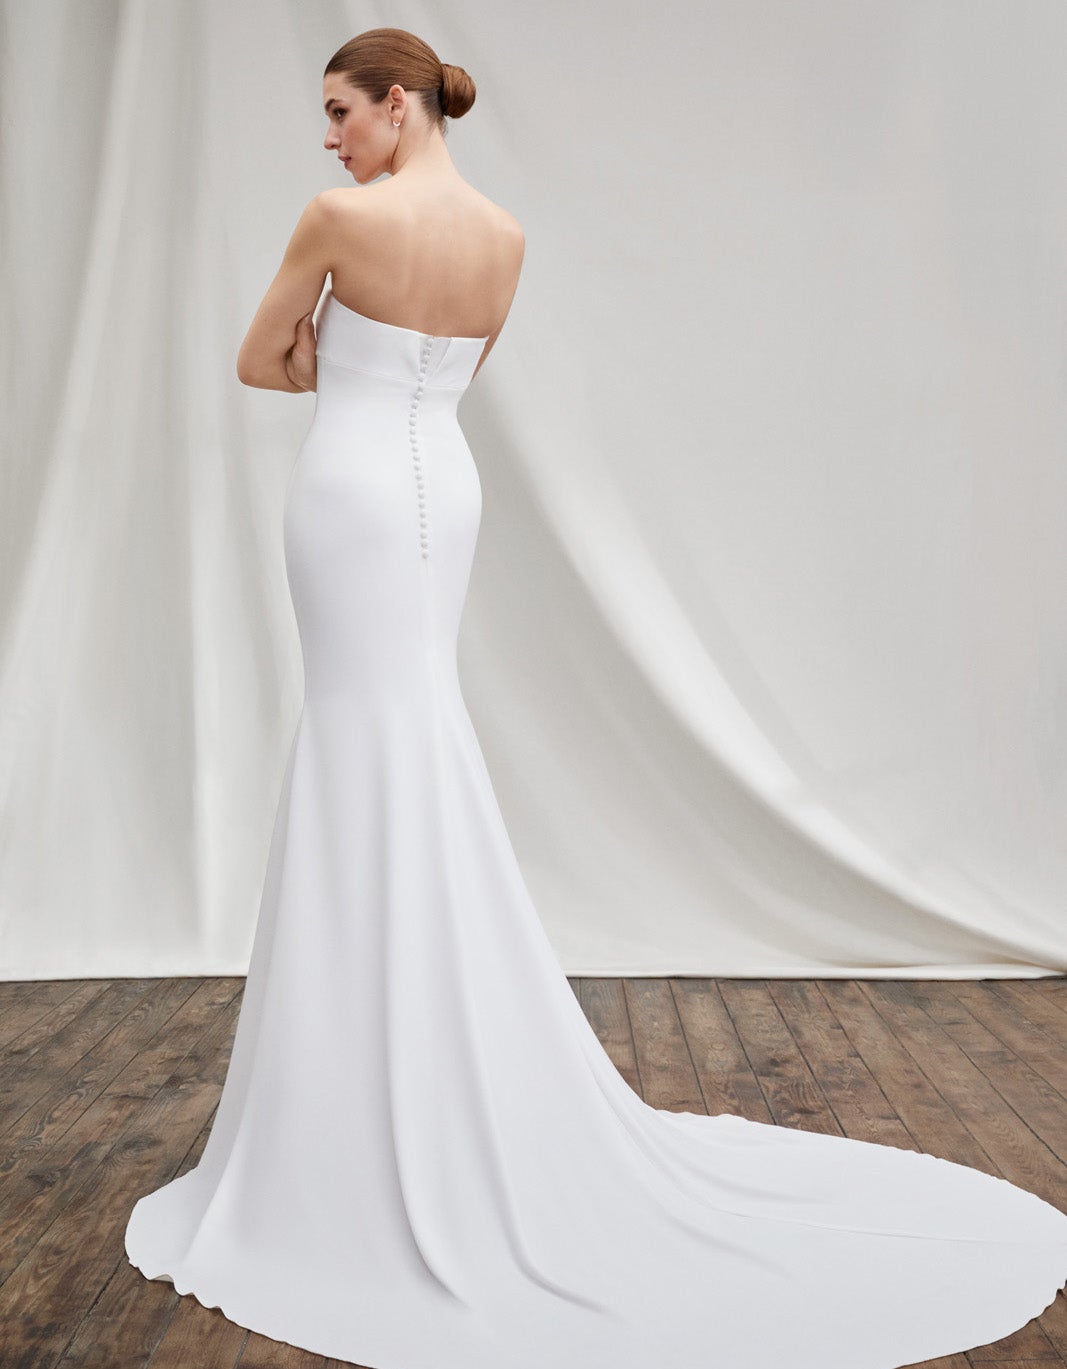 Modern Elegant Strapless Fit And Flare Gown by Alberto Palatchi - Image 2